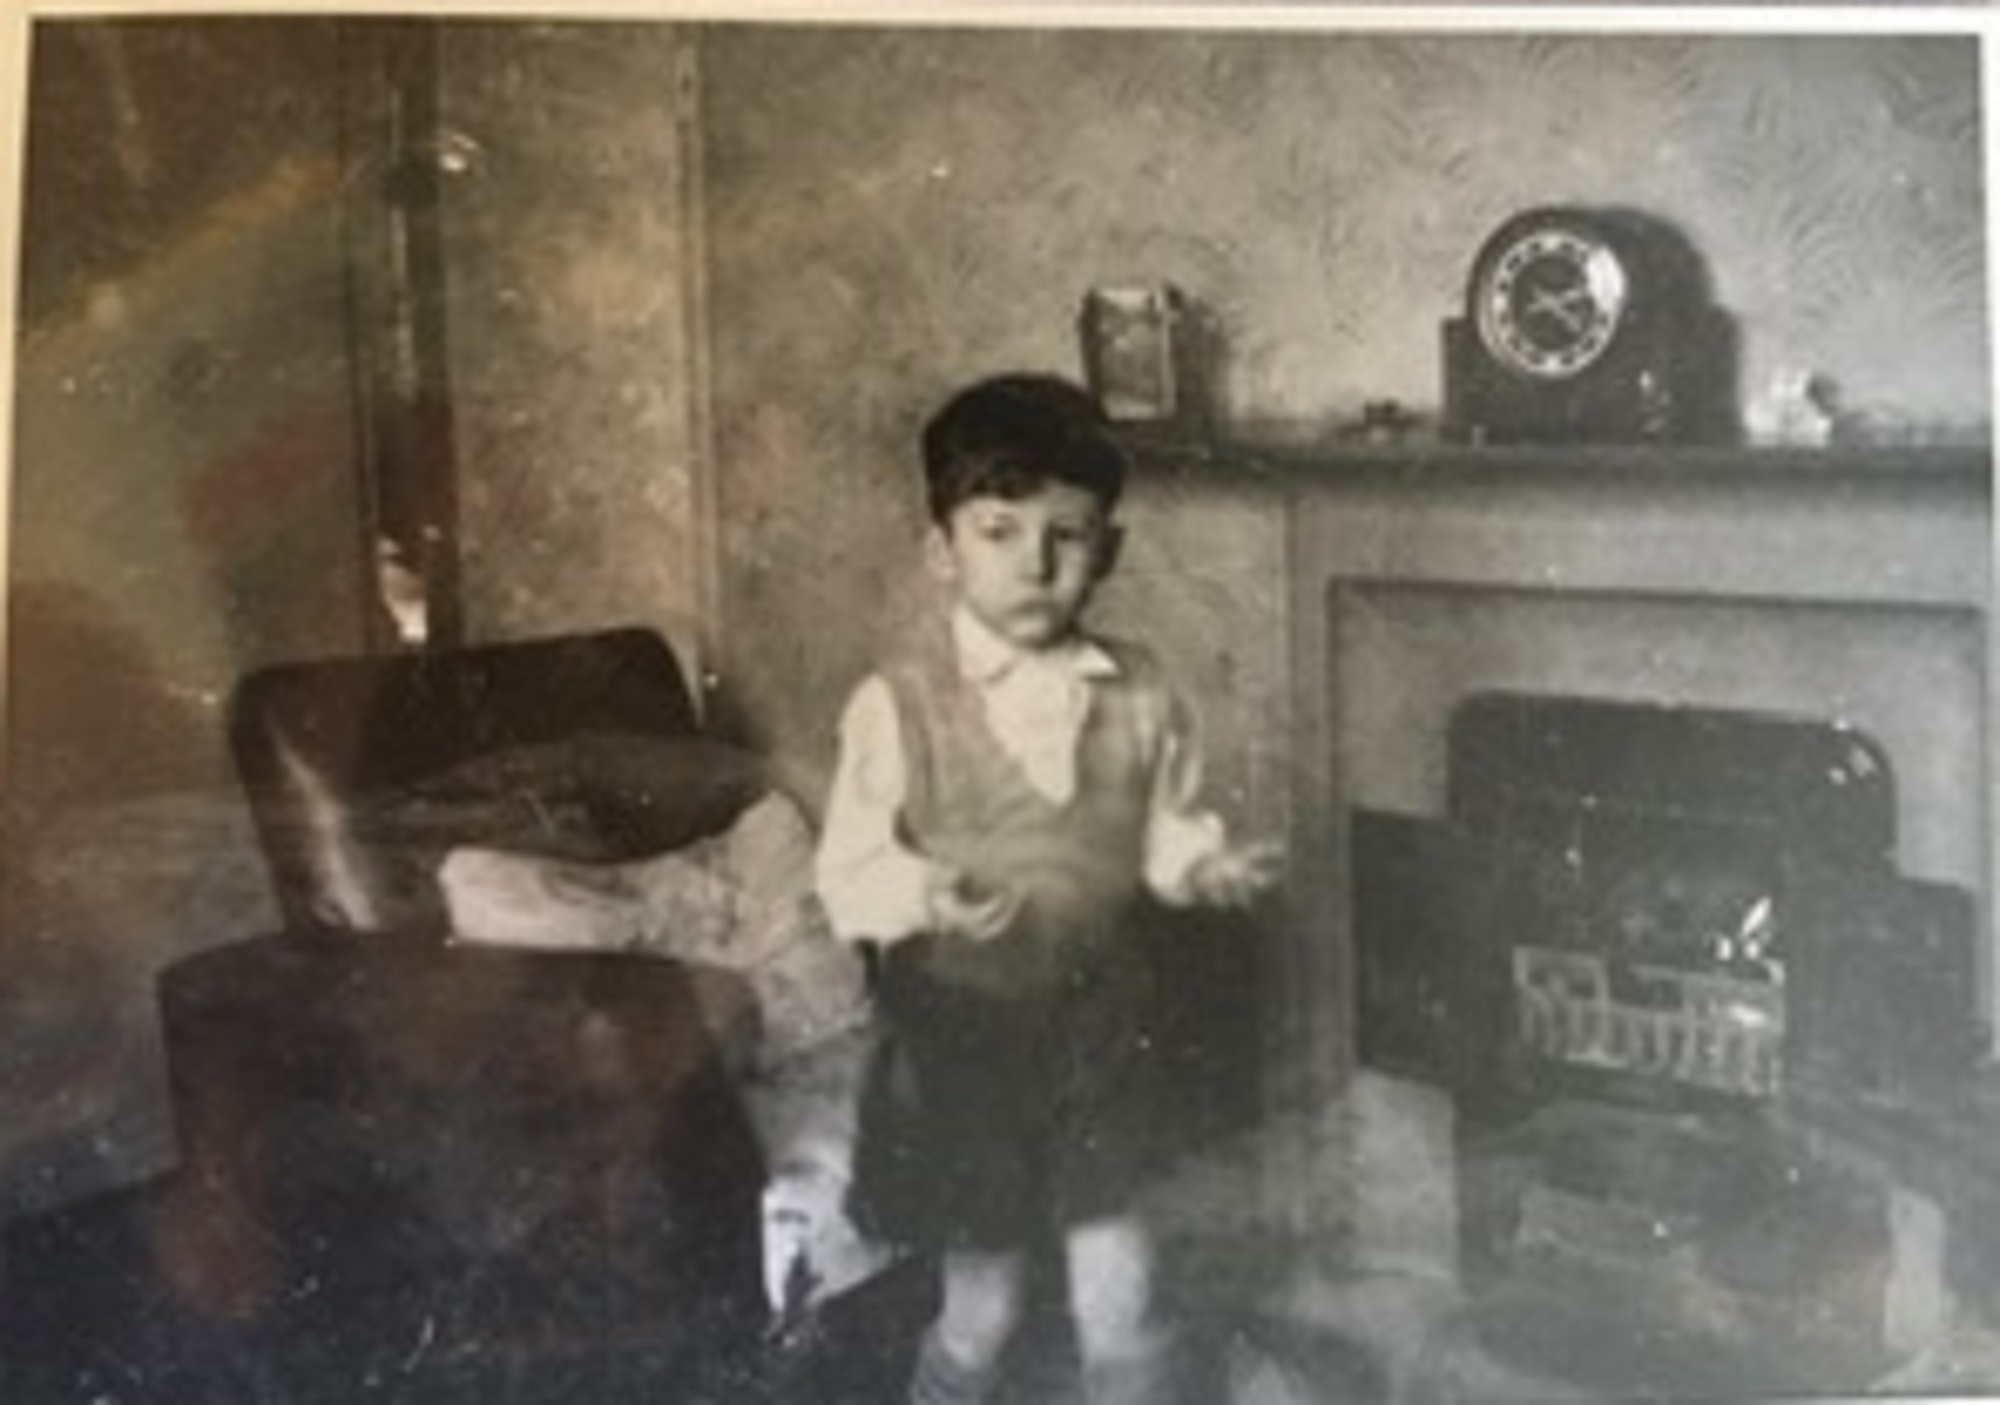 Me playing with fire early 1950s. 15 Bonchurch Road, Southampton